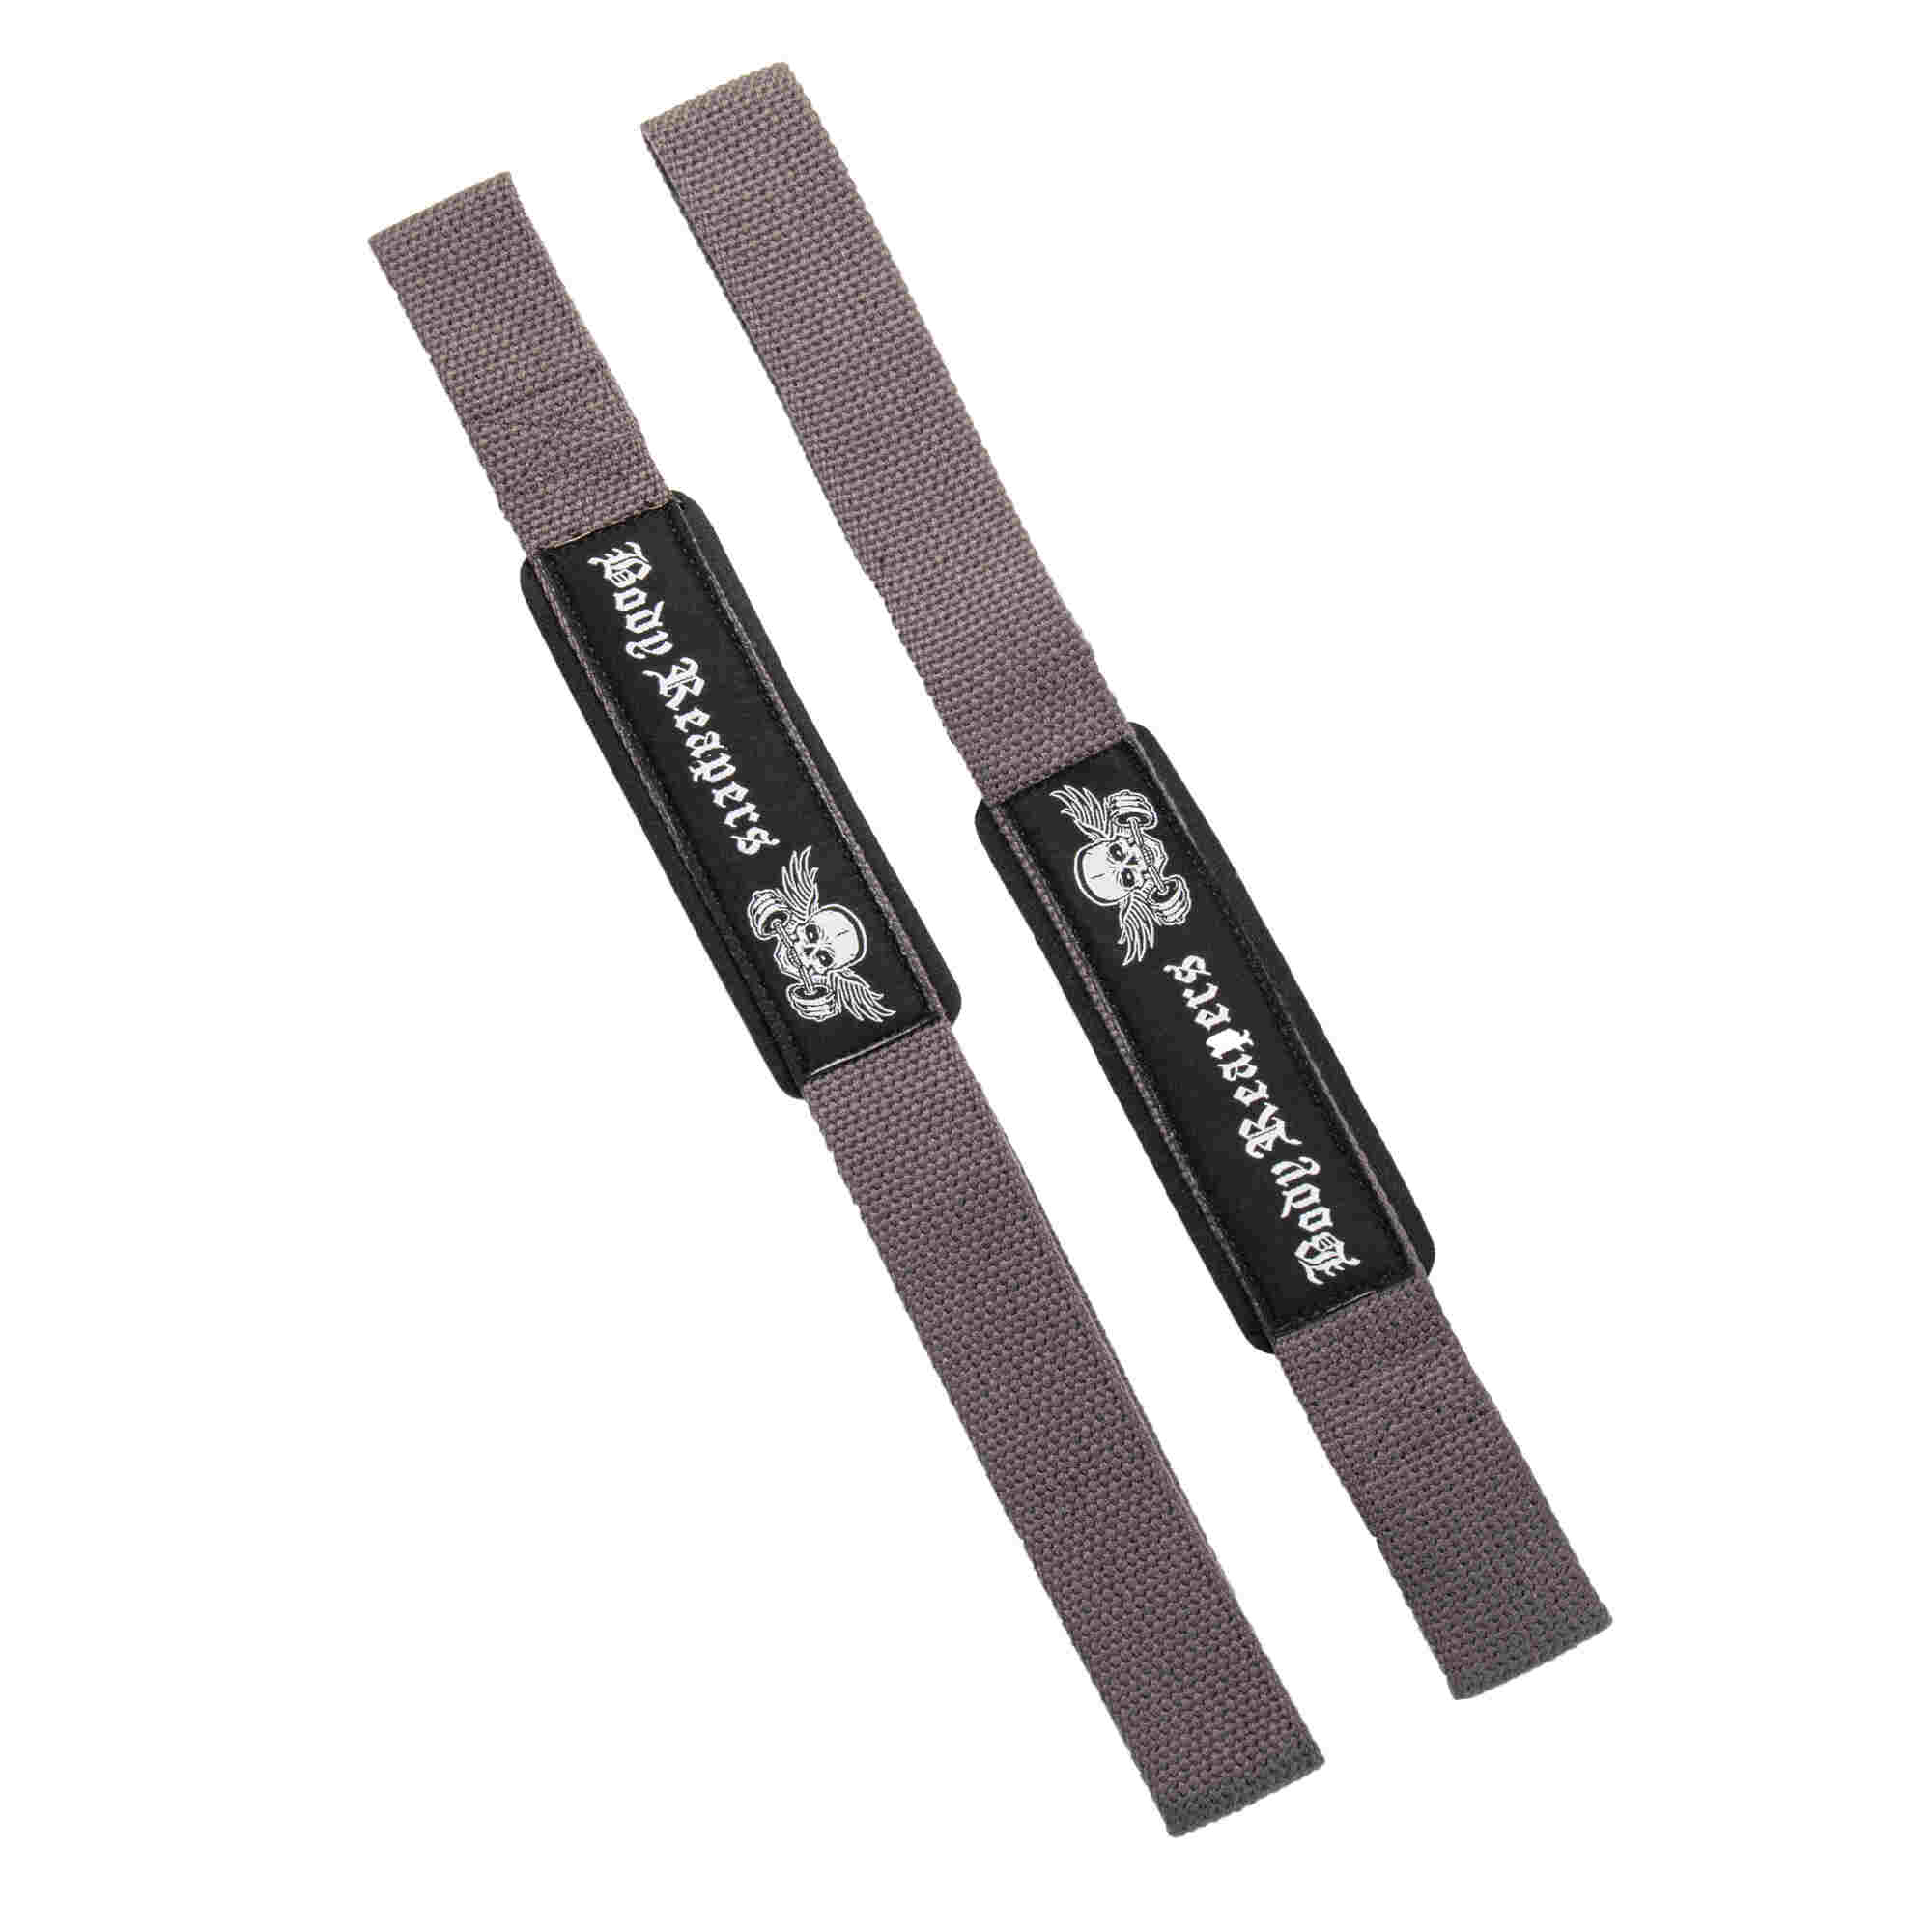 Body Reapers Weight Lifting Straps 24" Graphite Dominator Grey